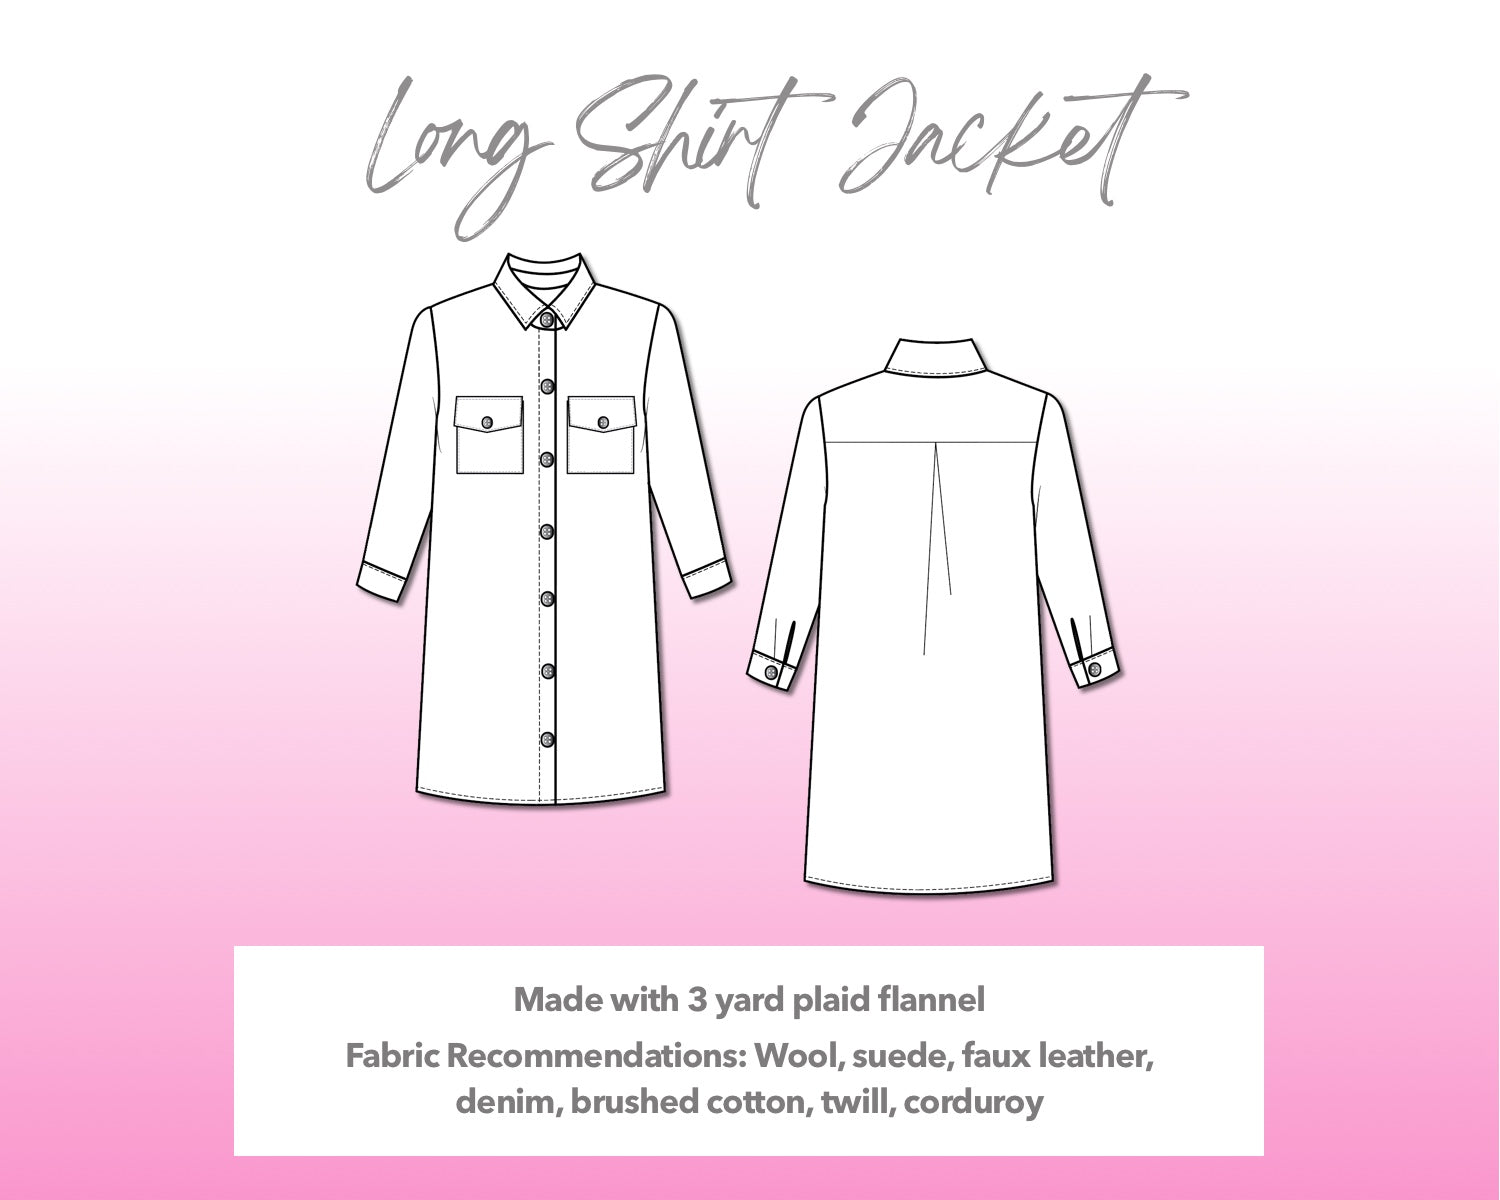 Illustration and detailed description for Long Shirt Jacket sewing pattern.